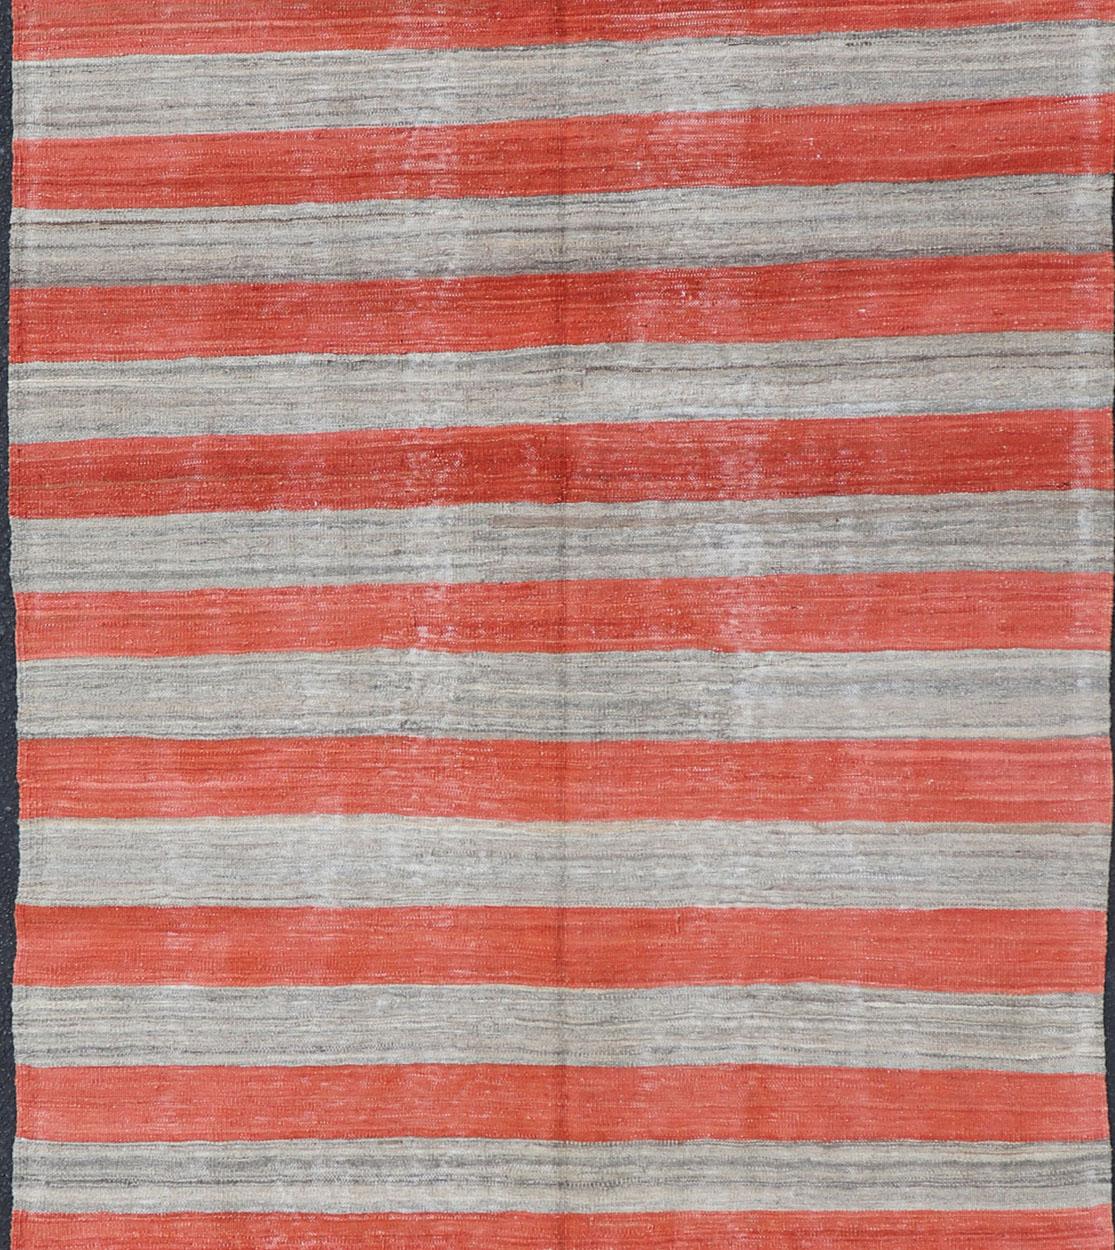 Wide runner flat weave Kilim runner with stripes with modern design in shades of gray and orange red, rug AFG-109, country of origin / type: Afghanistan / Kilim

Measures: 4'10 x 12'7 

This playful piece features a Classic stripe design that